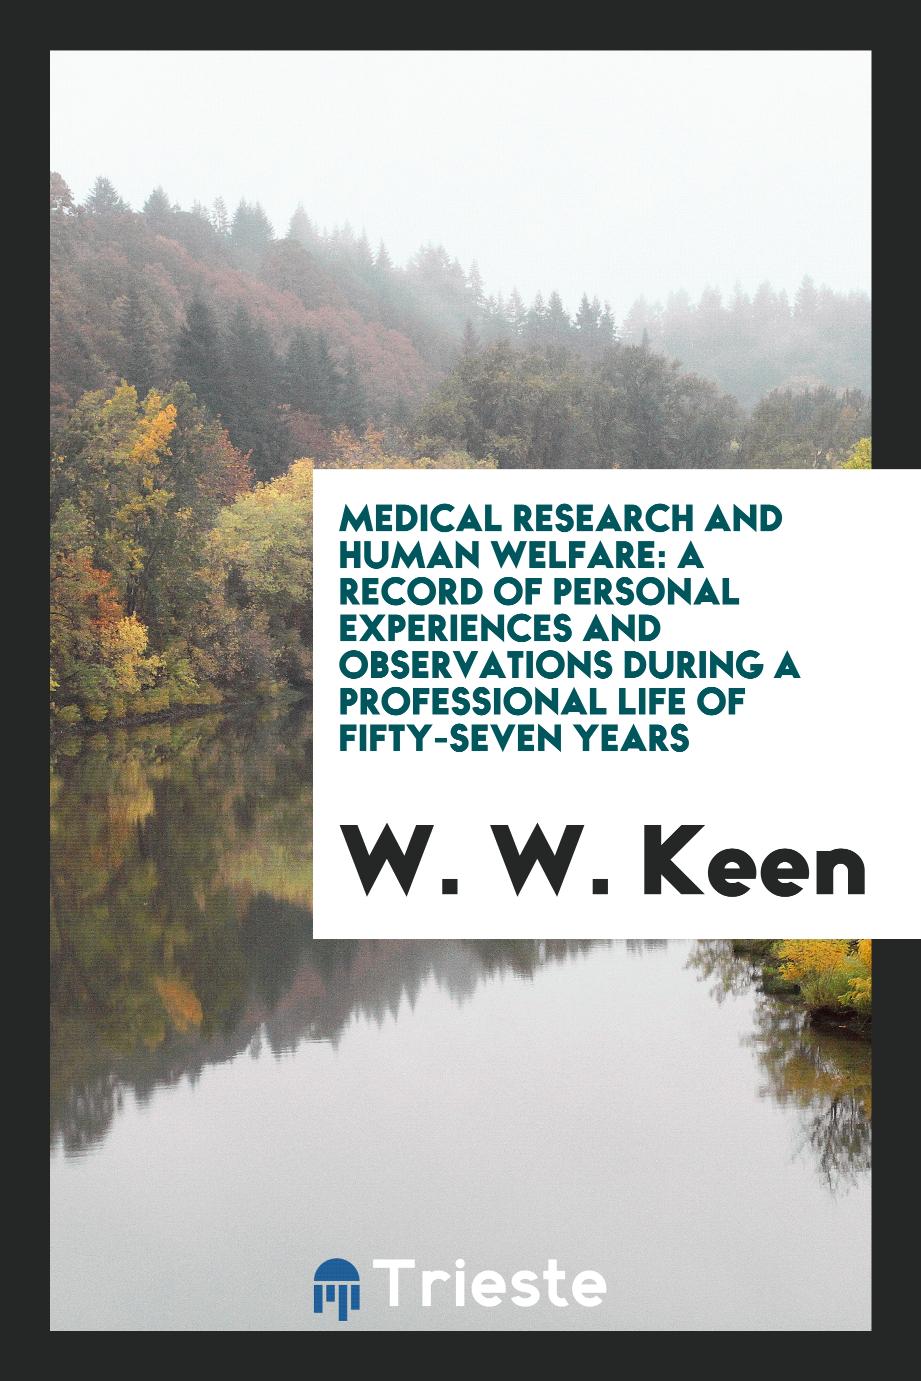 Medical research and human welfare: A record of personal experiences and observations during a professional life of fifty-seven years